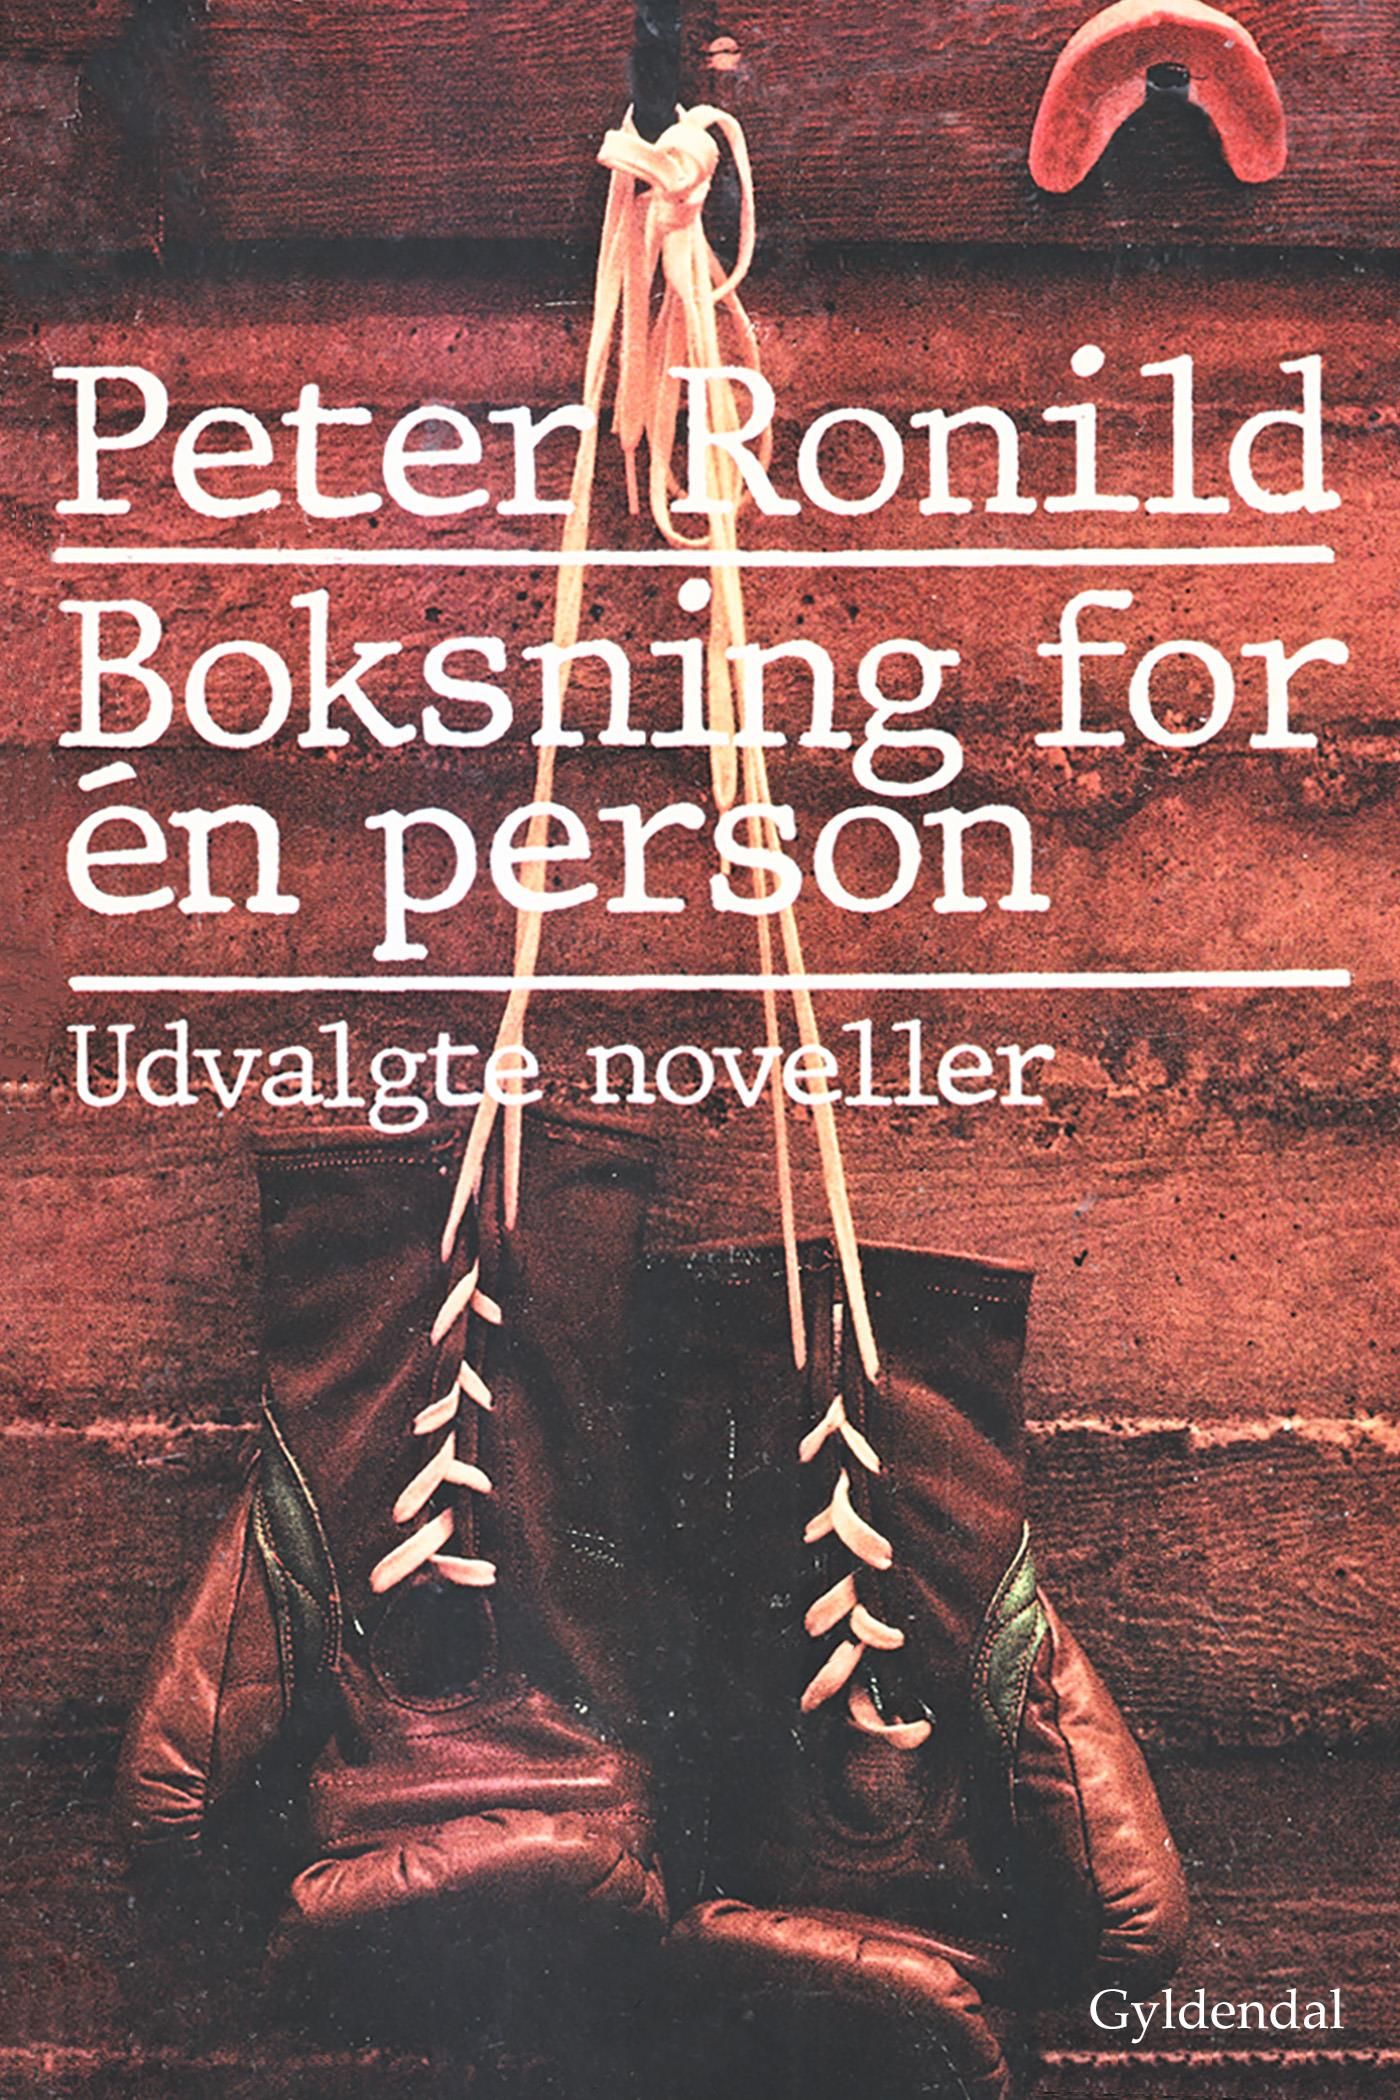 Boksning for én person, eBook by Peter Ronild